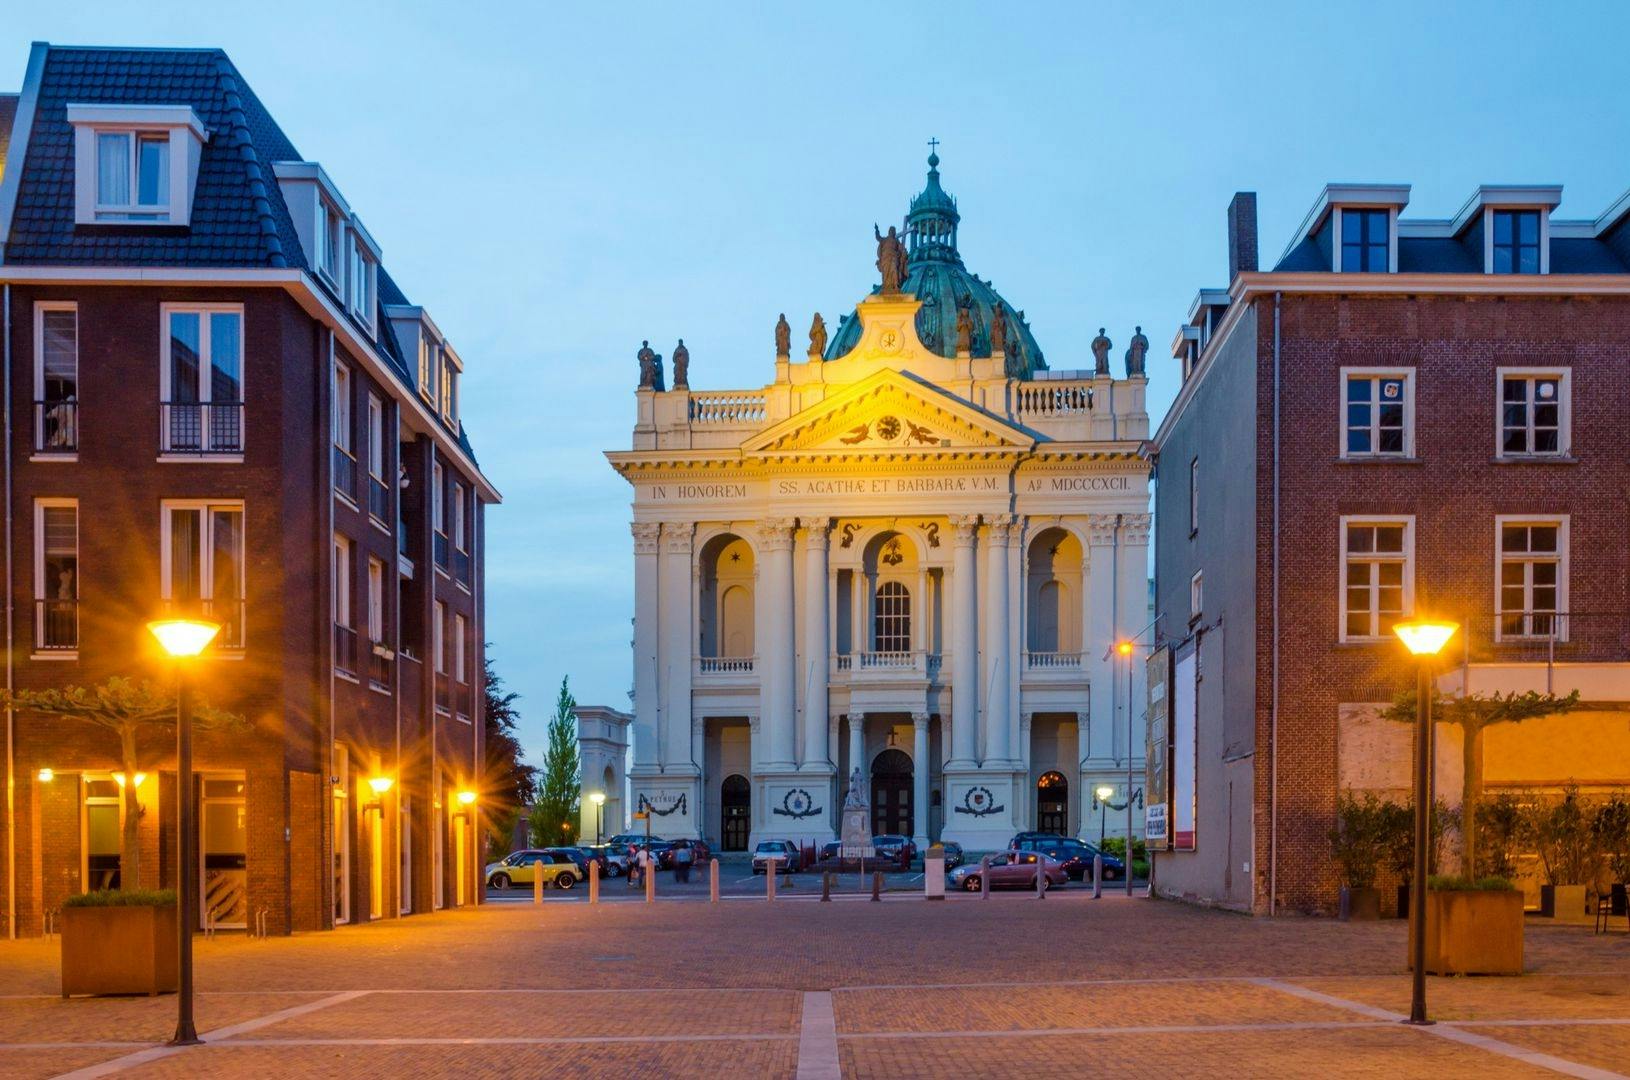 Oudenbosch: walk through historical places with self-guided audio tour